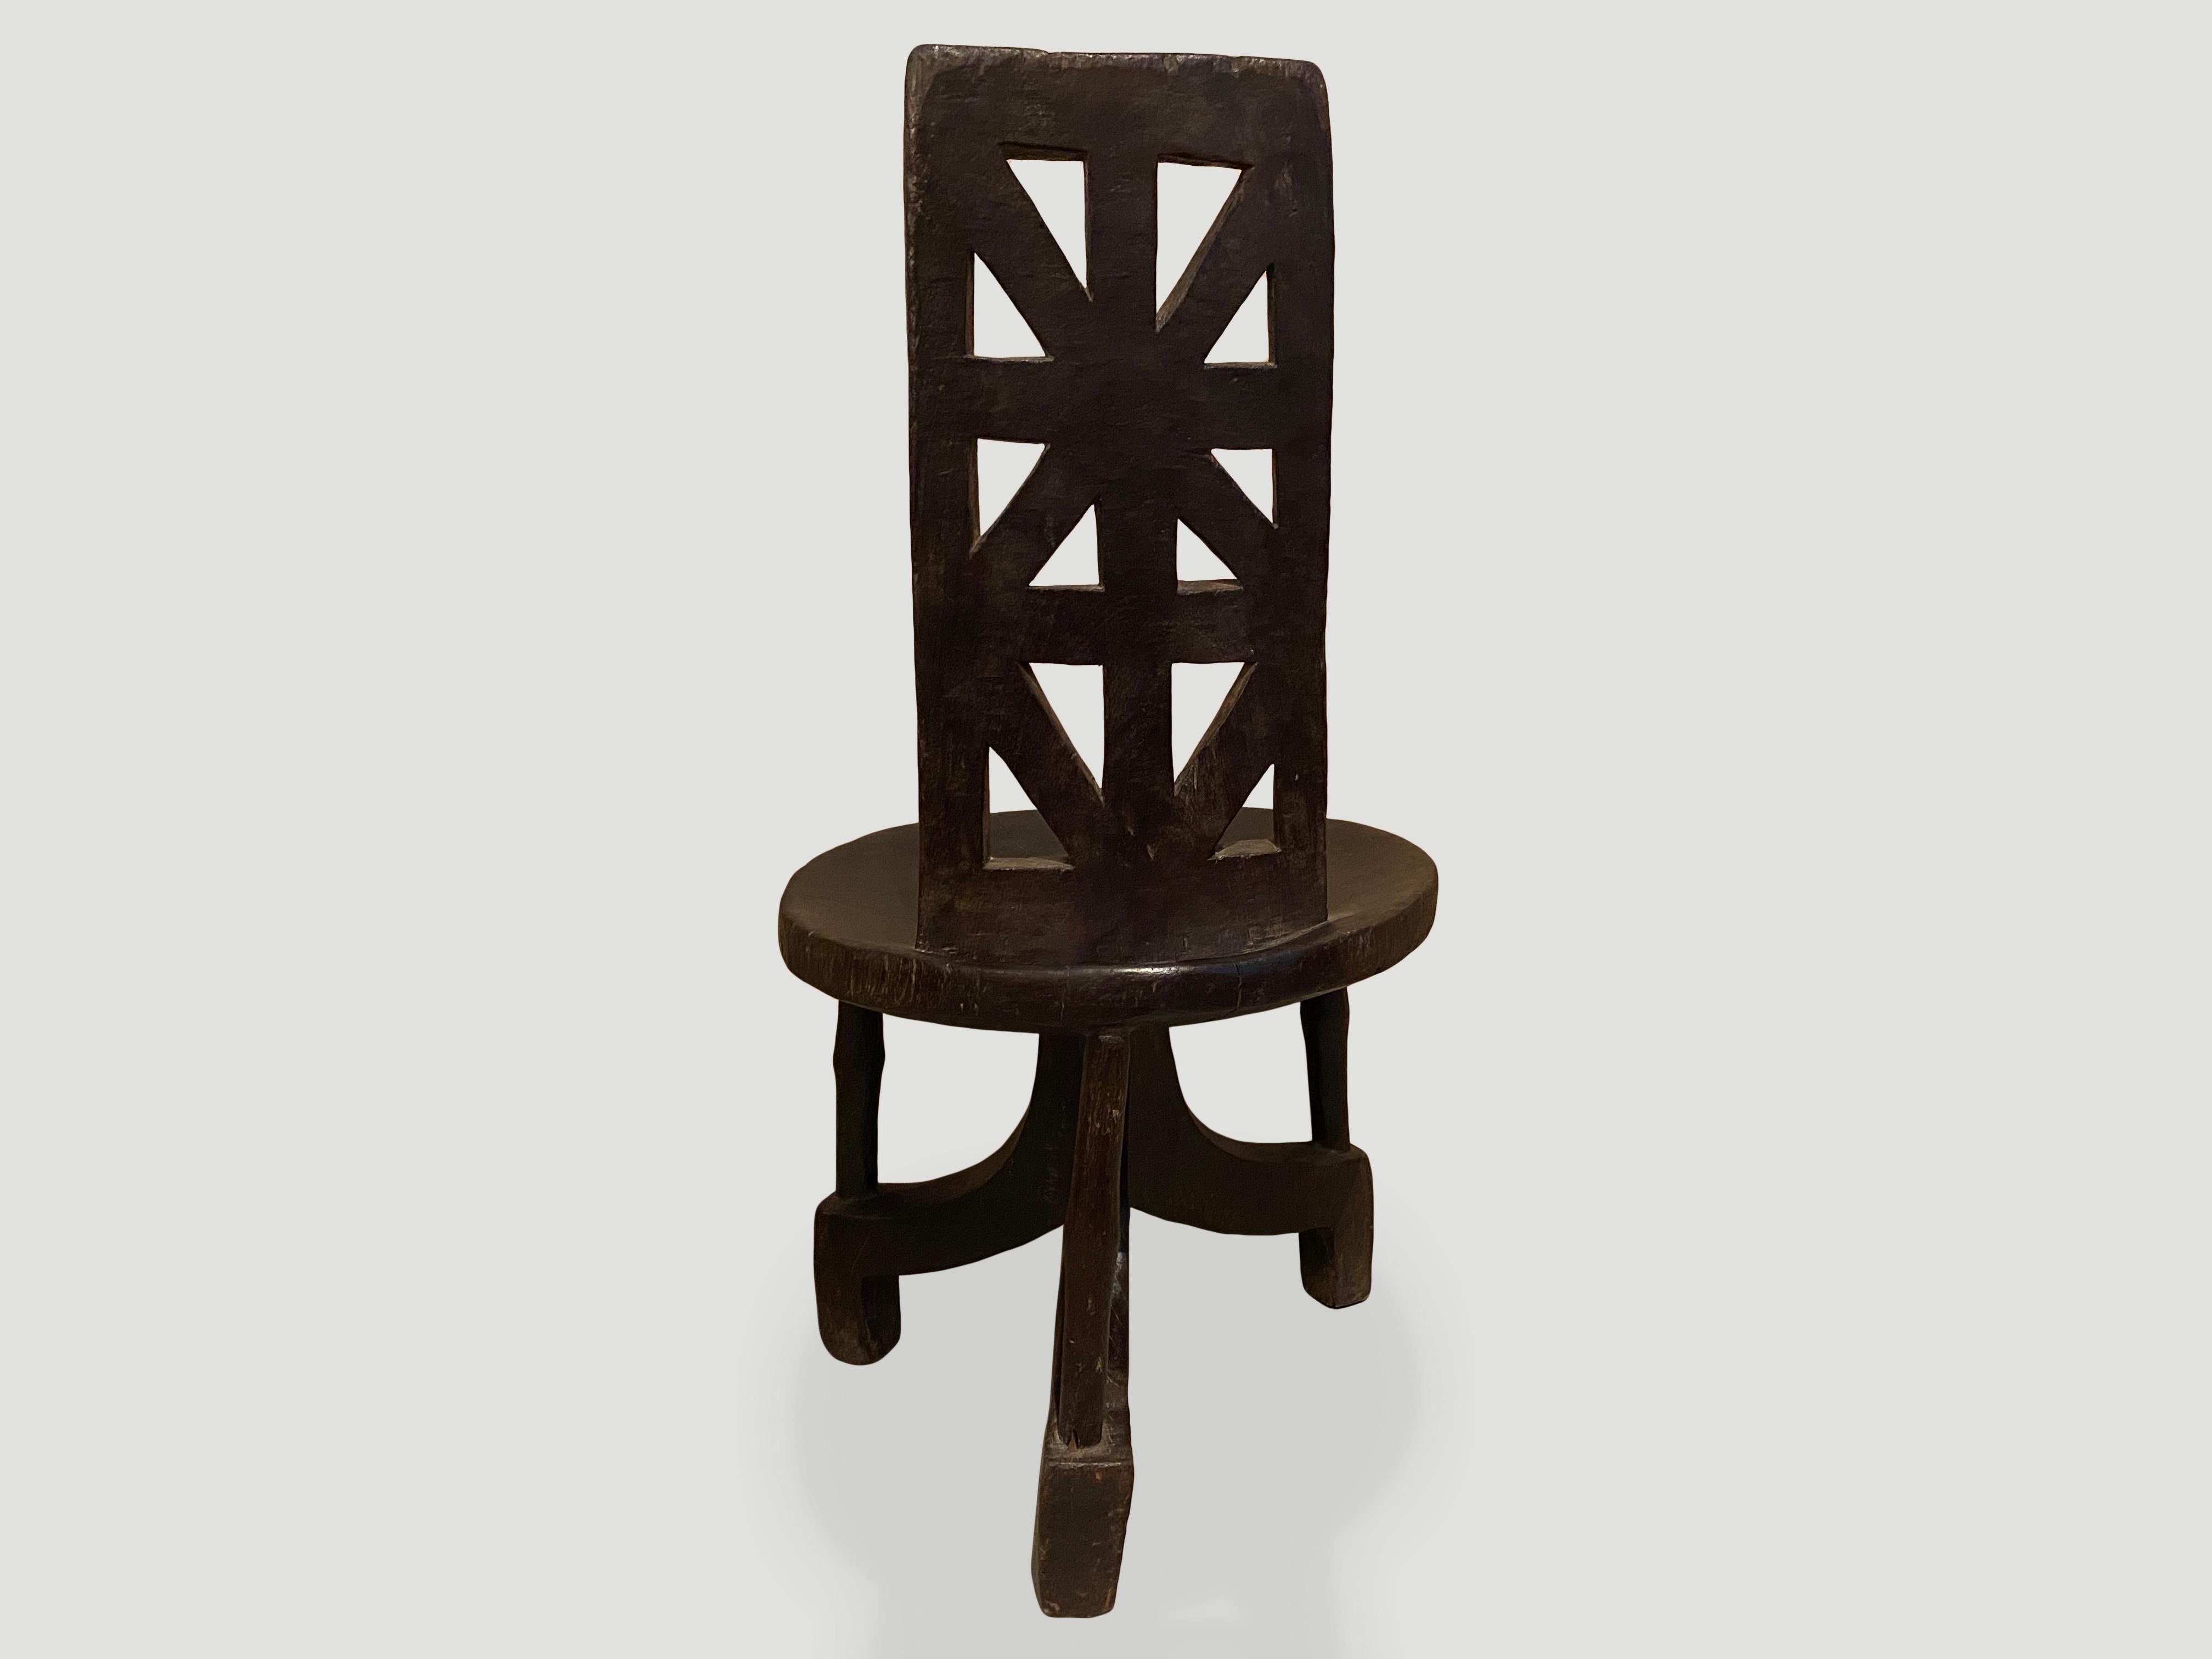 This hand carved wooden chair is from the Jima people of Southern Ethiopia. A slightly concave seat sits on a tripod base connected by slender rods. The high rectangular back rest has a geometric design. Carved out of a single block of wood. Both an